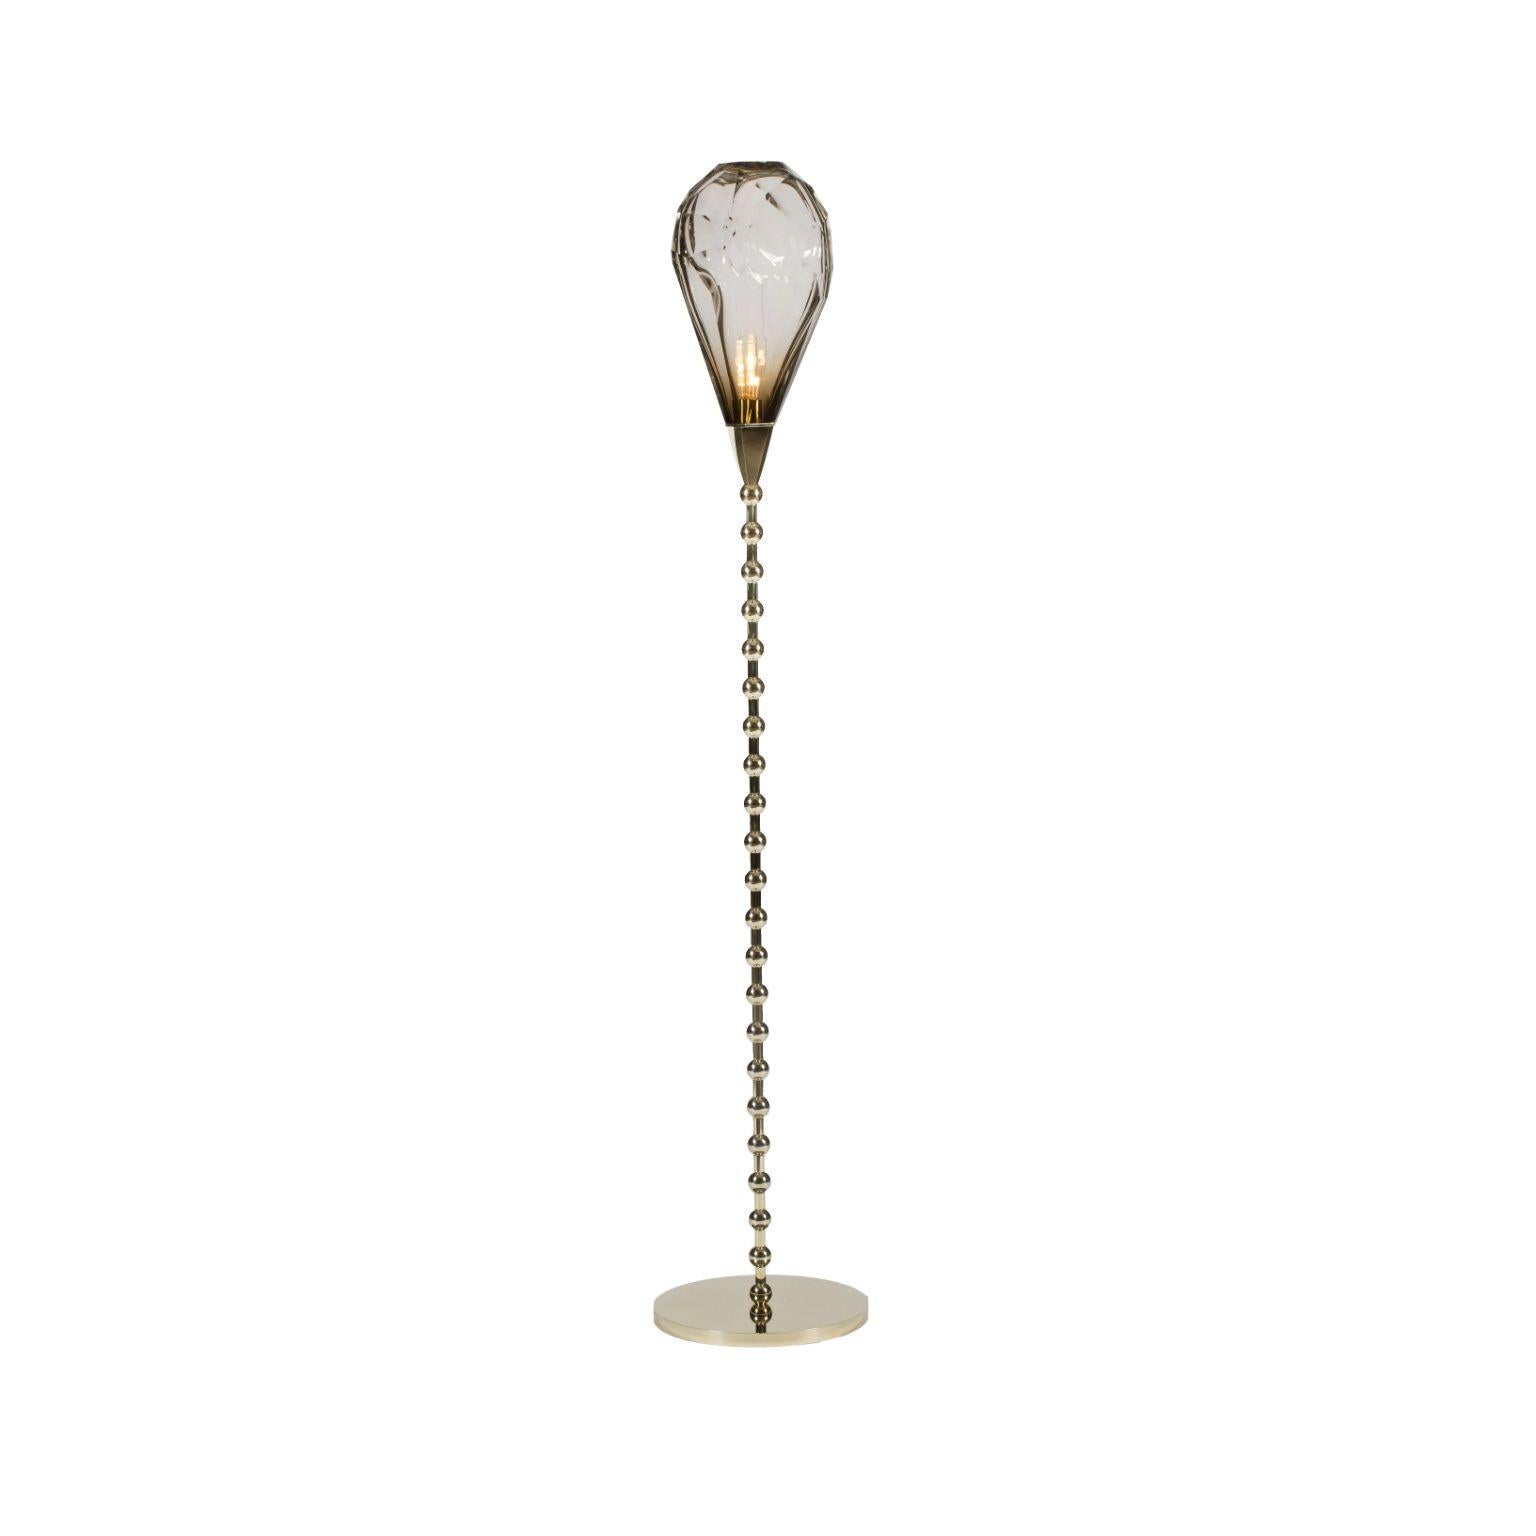 Set of 2 Adamas floor lamps by Emilie Lemardeley
Dimensions: D 30 x H 160 cm
Materials: brass, glass
Weight: 35 kg

The Adamas lightings take their inspiration from Greek myth; the story of a young man transformed into a precious stone, a